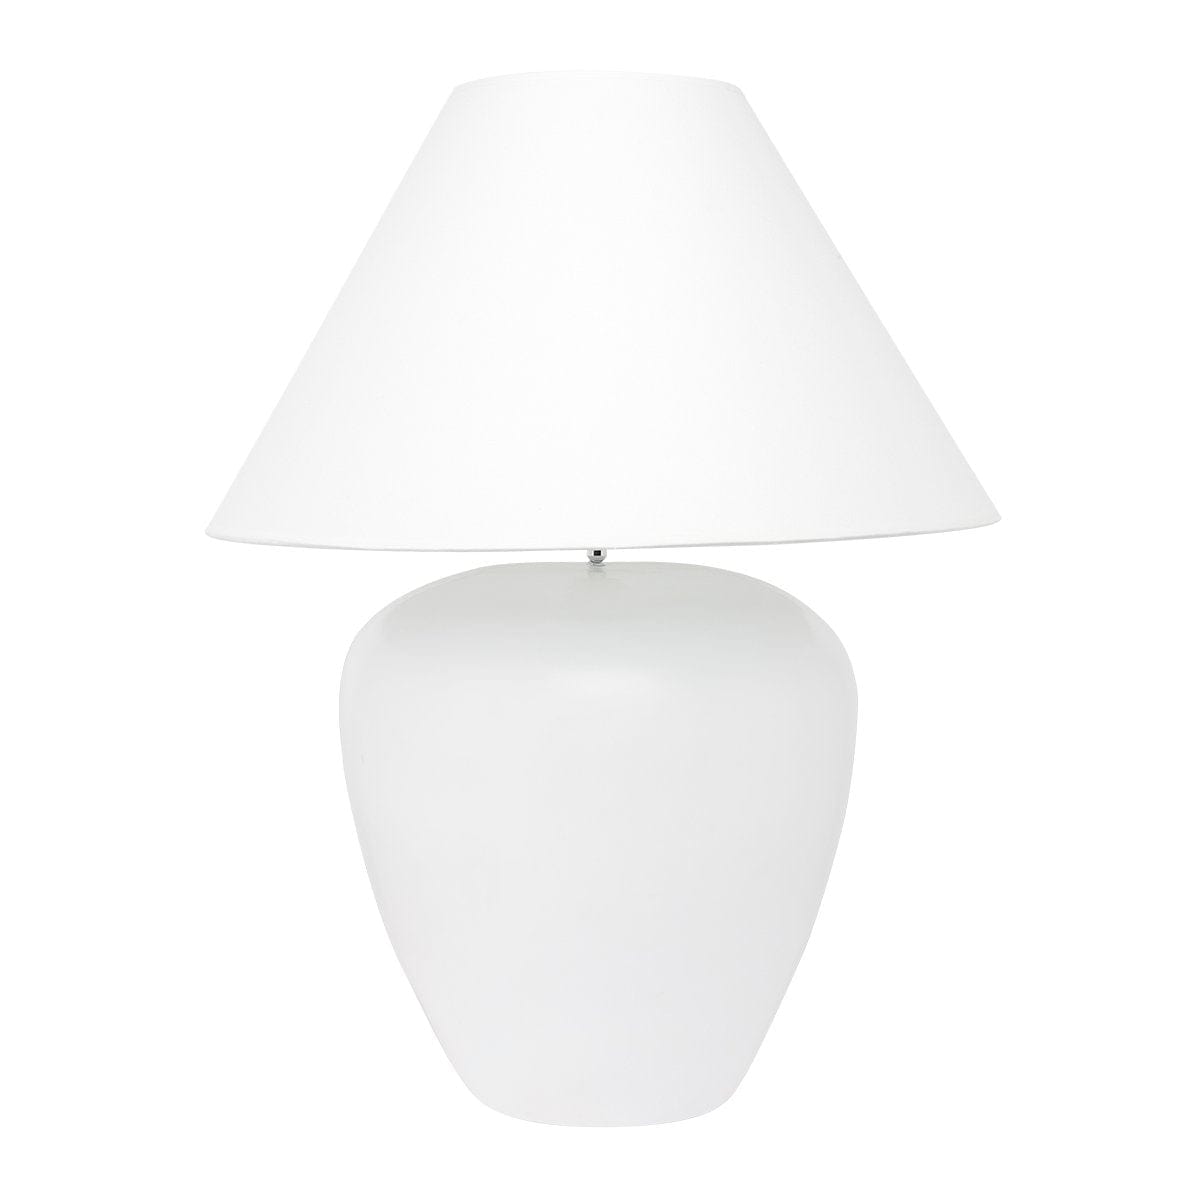 CAFE LIGHTING & LIVING Table Lamp Picasso Table Lamp - White w White Shade B13285